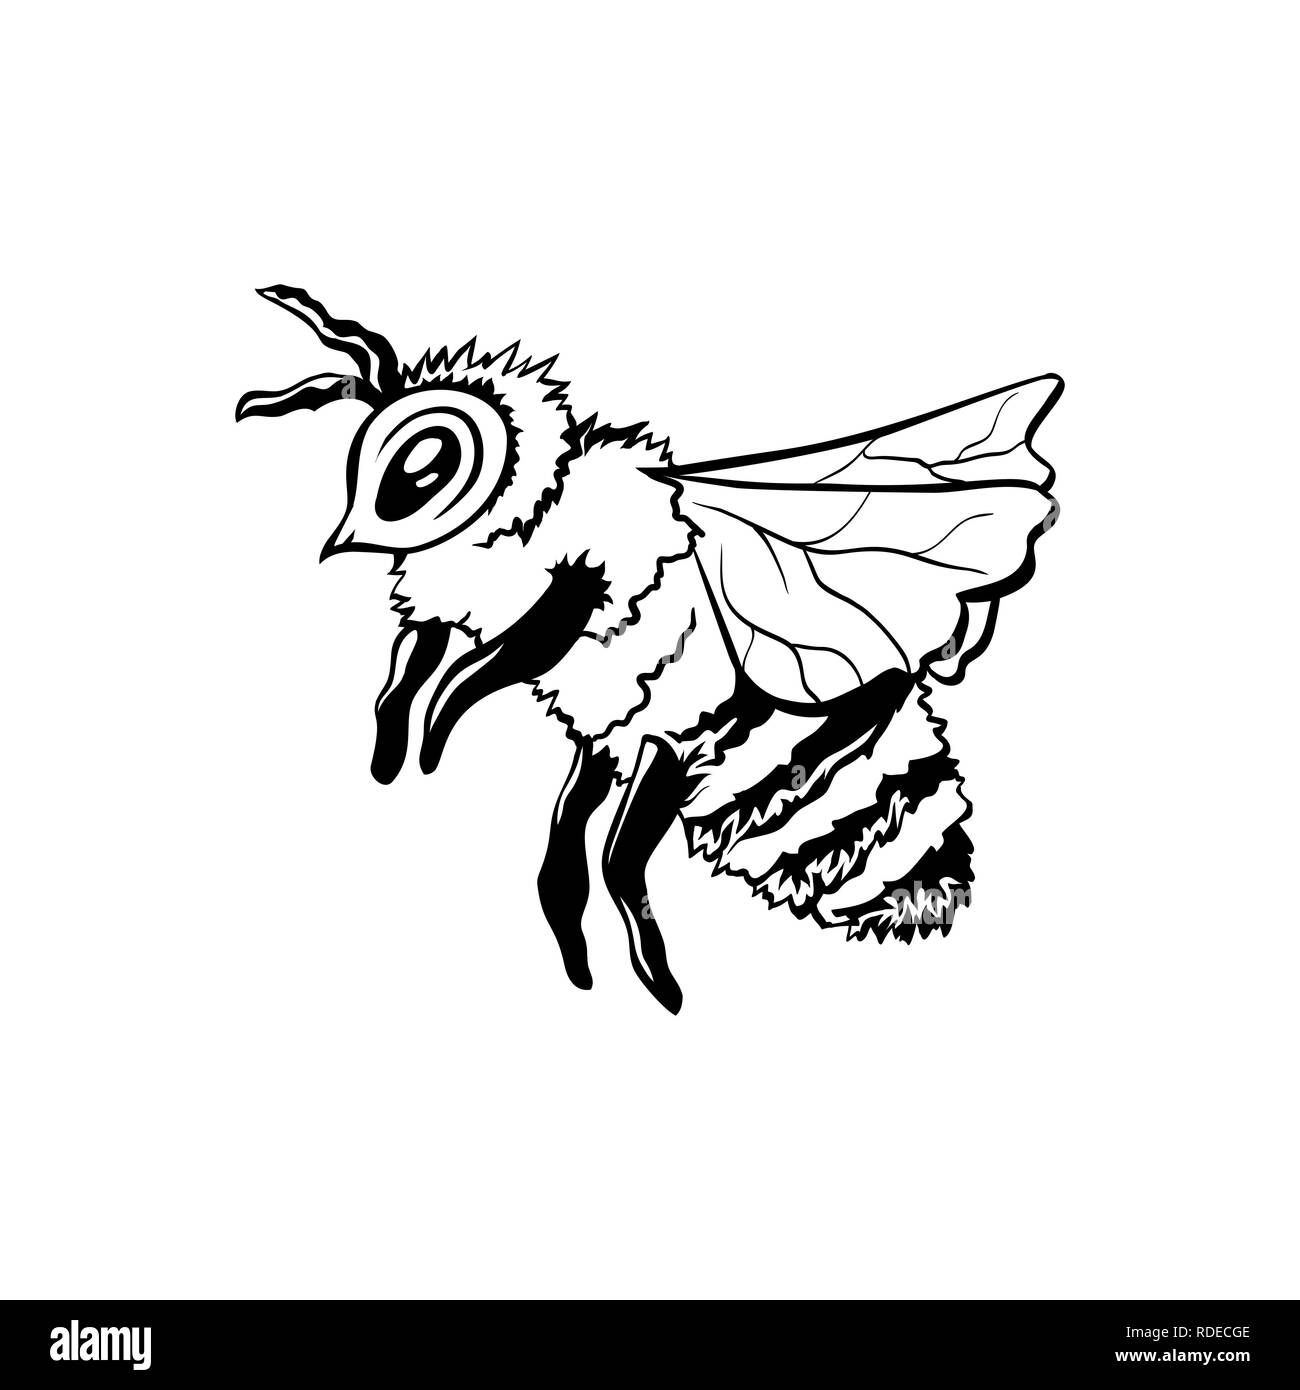 Honey Bee, Outline Logo Design. Isolated Vector. Black Engraved Element. Vintage Style Illustration of Flying Wasp Stock Vector